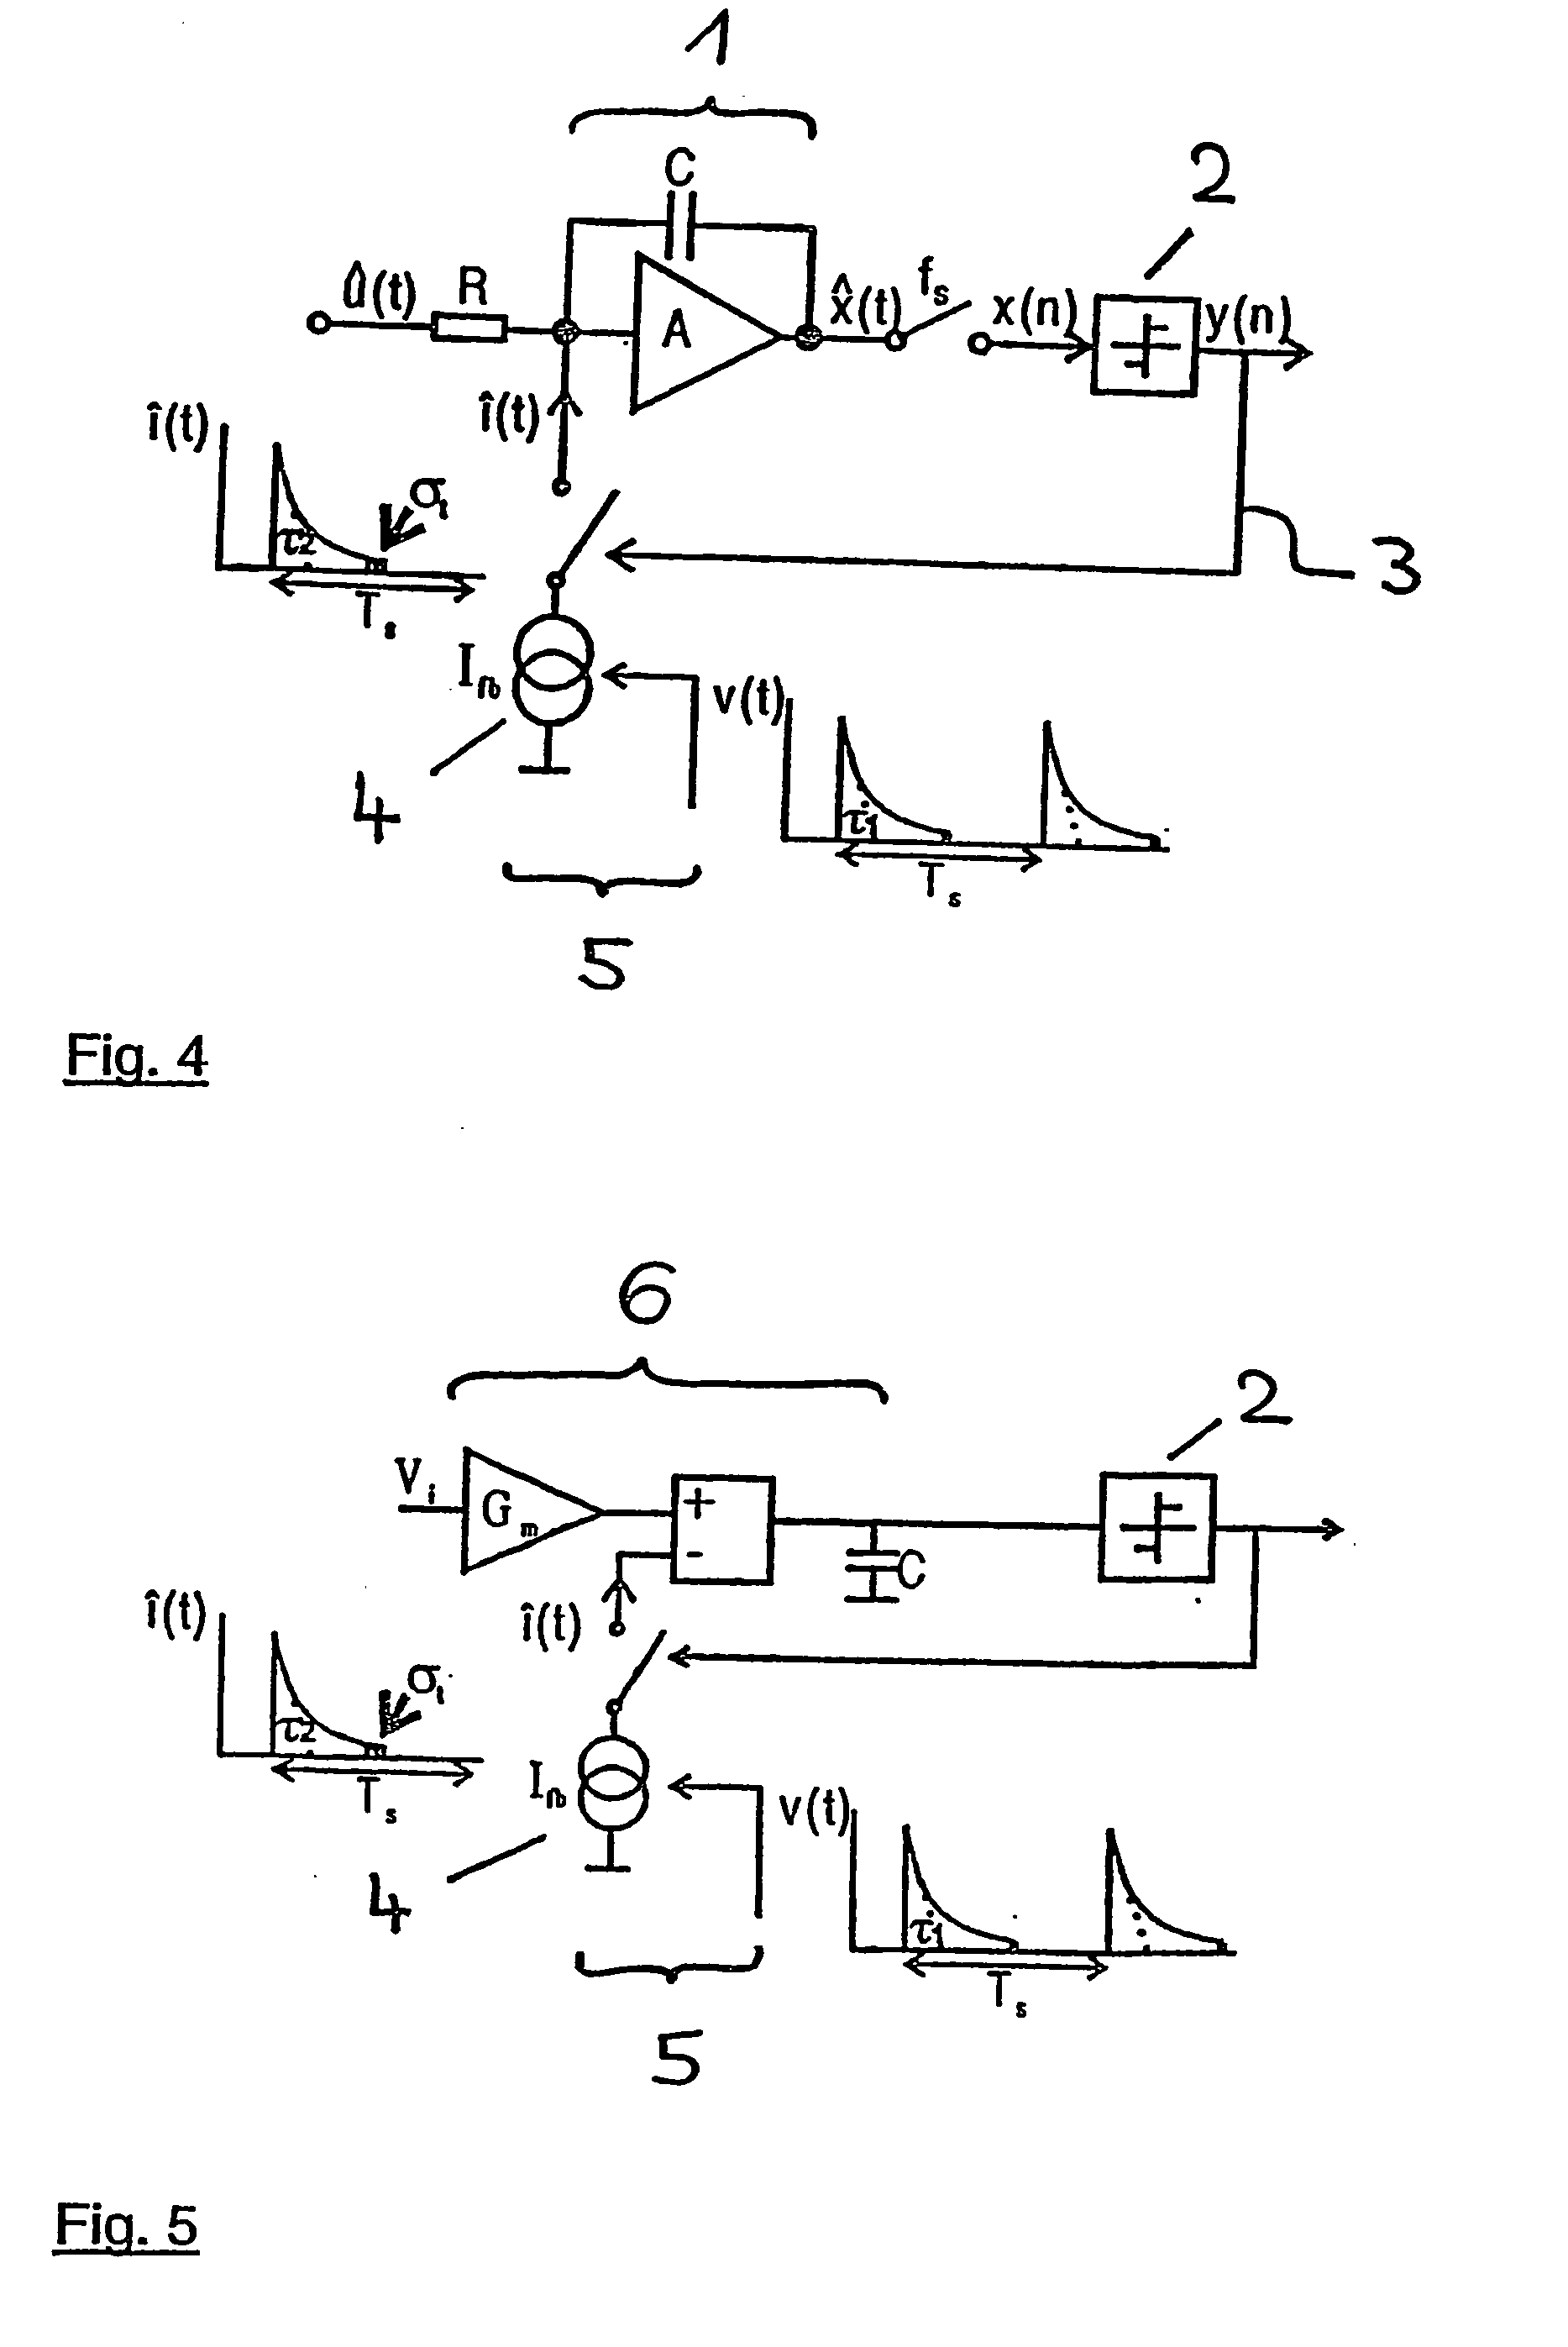 Controlled power source, in particular for a digital analogue converter in continuous time sigma delta modulators